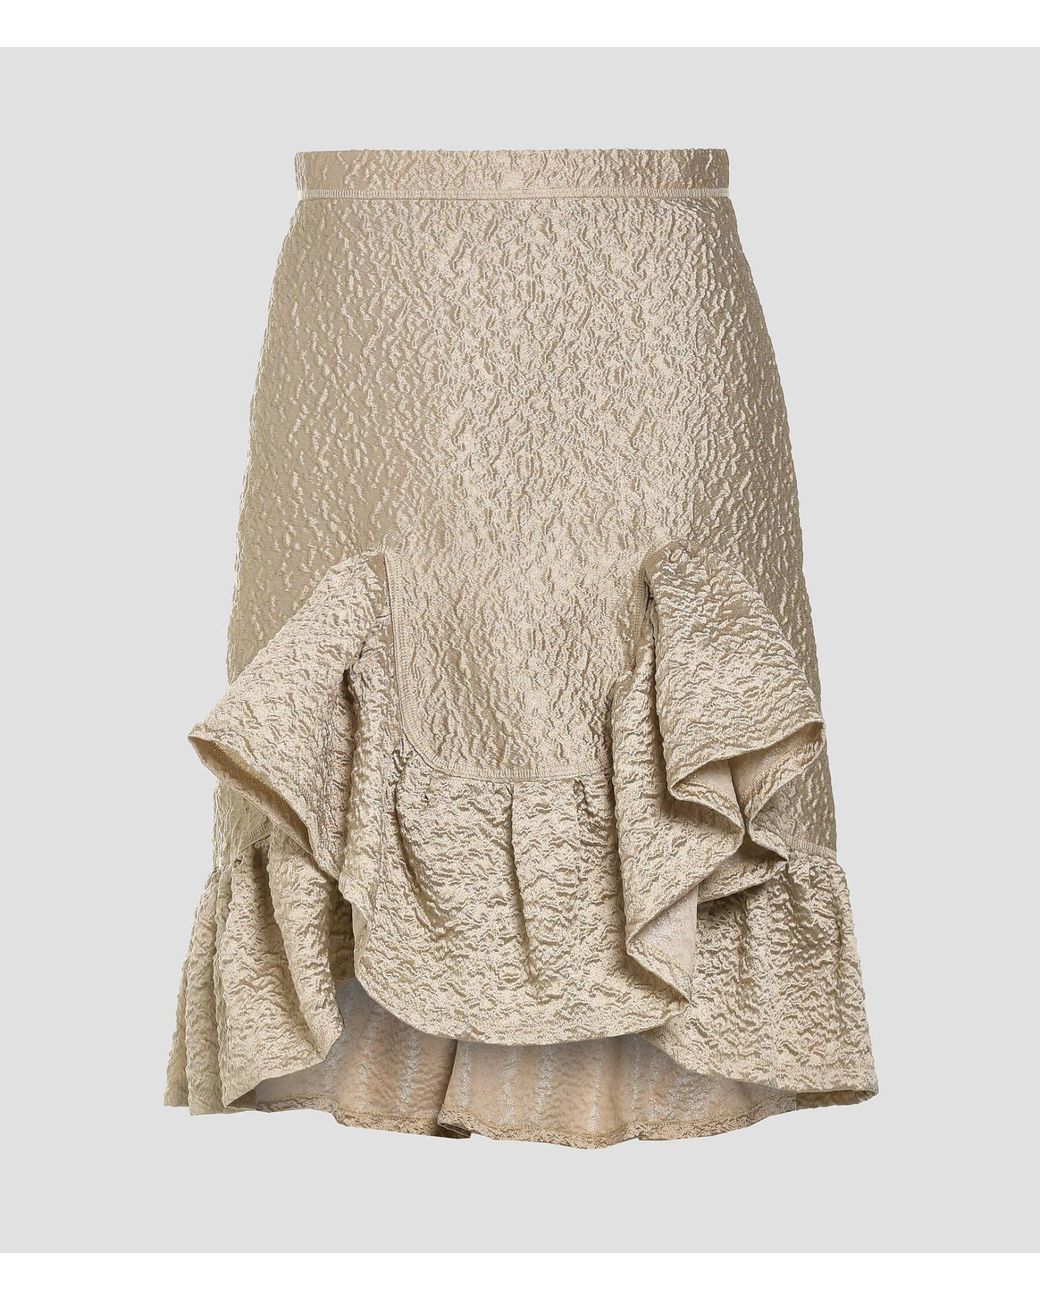 Koche Synthetic Cloque Jacquard Skirt in Beige Natural Womens Clothing Skirts Knee-length skirts 